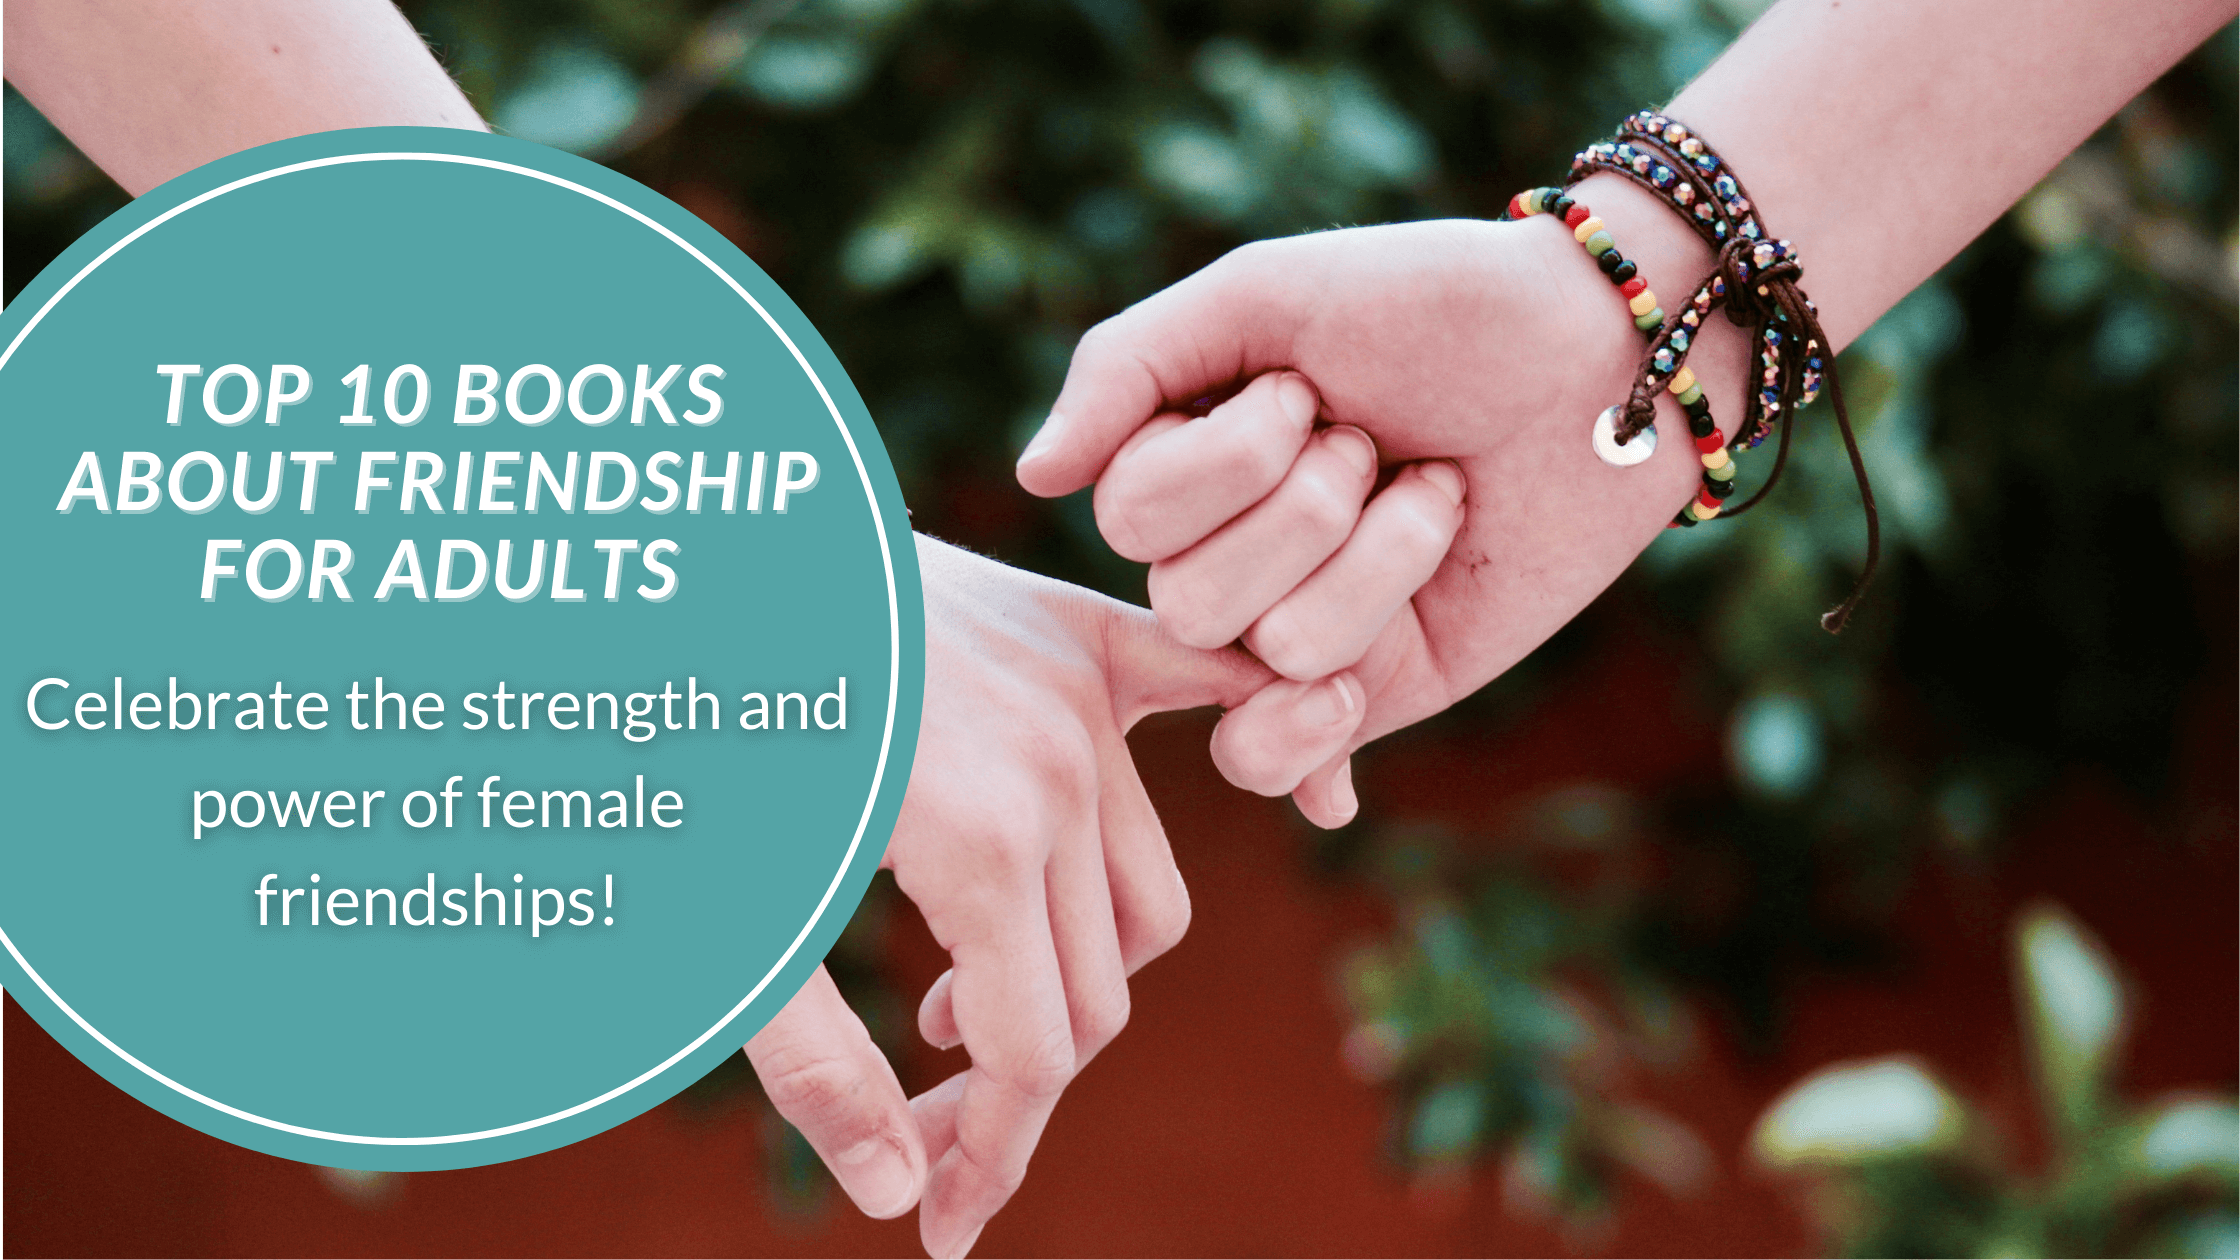 Top 10 Books About Friendship for Adults. Two female hands linked at the pinky.